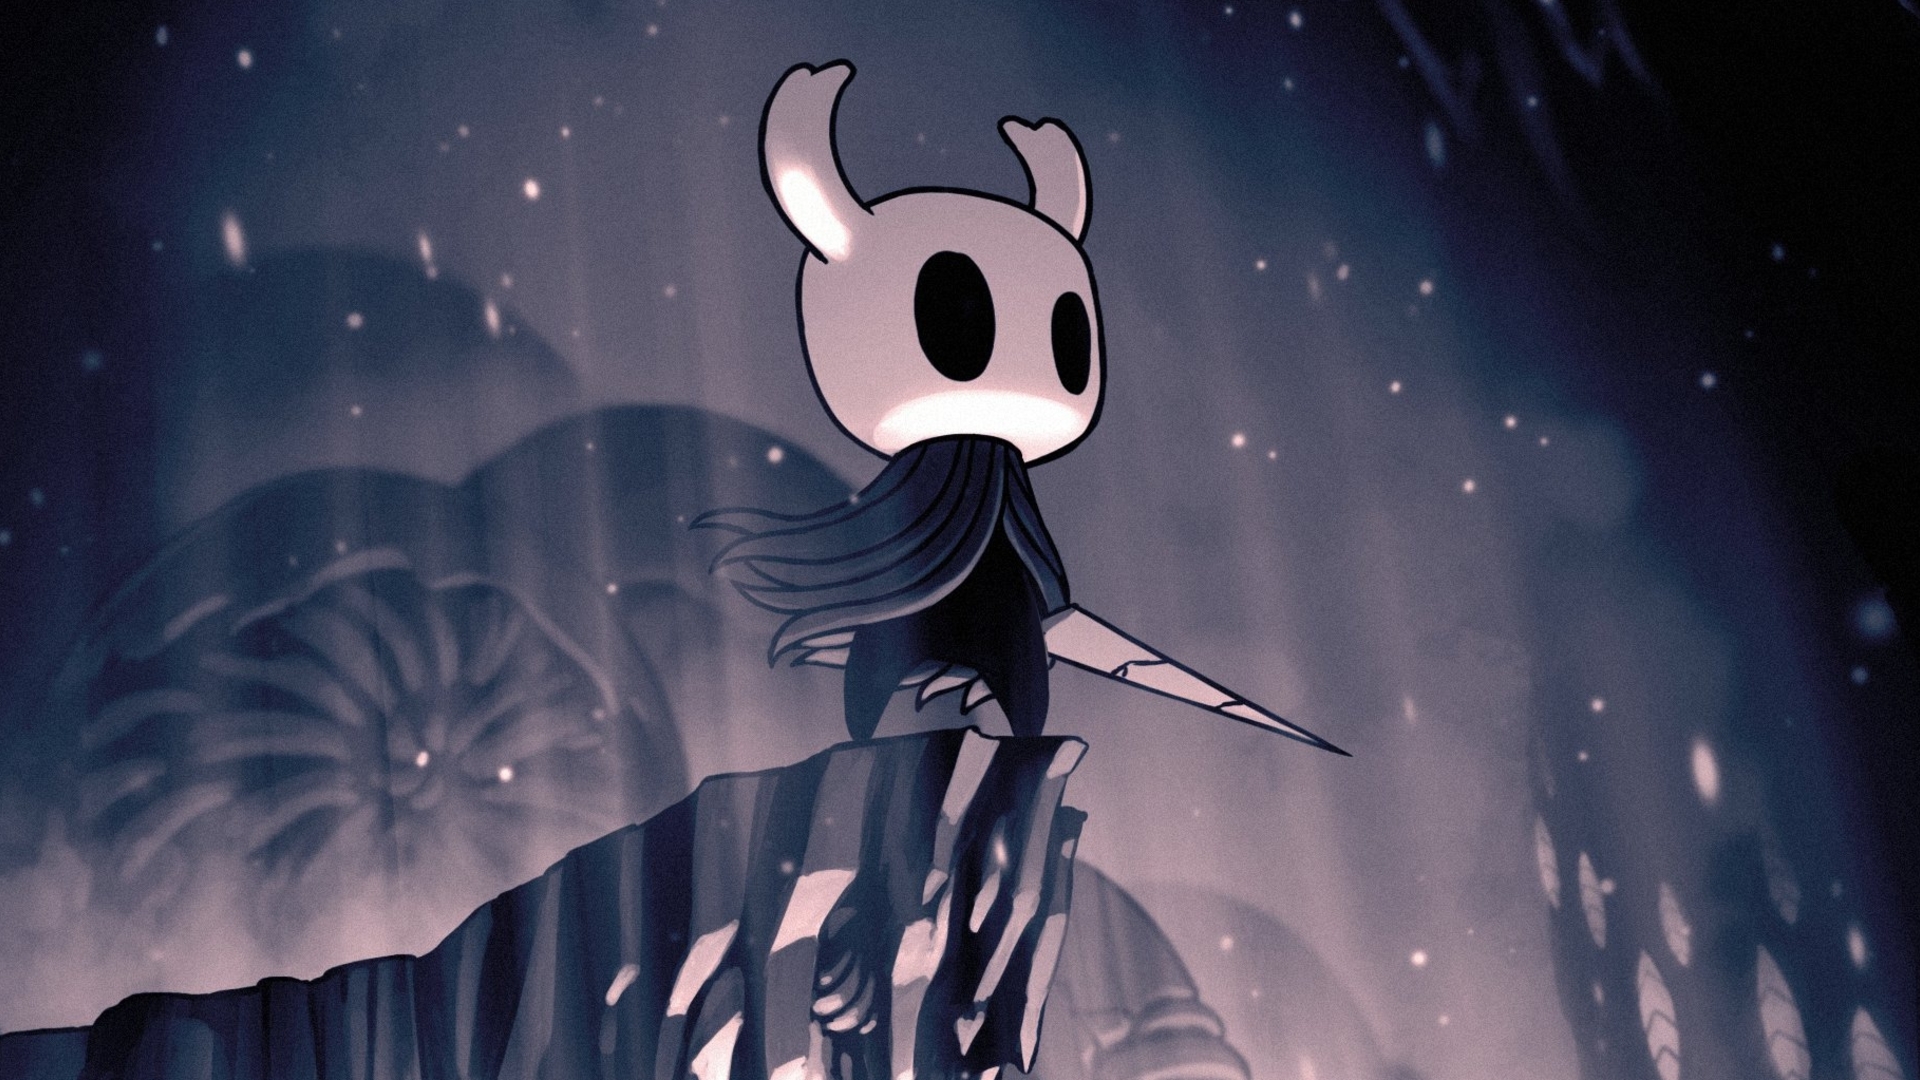 Video Game Hollow Knight HD Wallpaper | Background Image